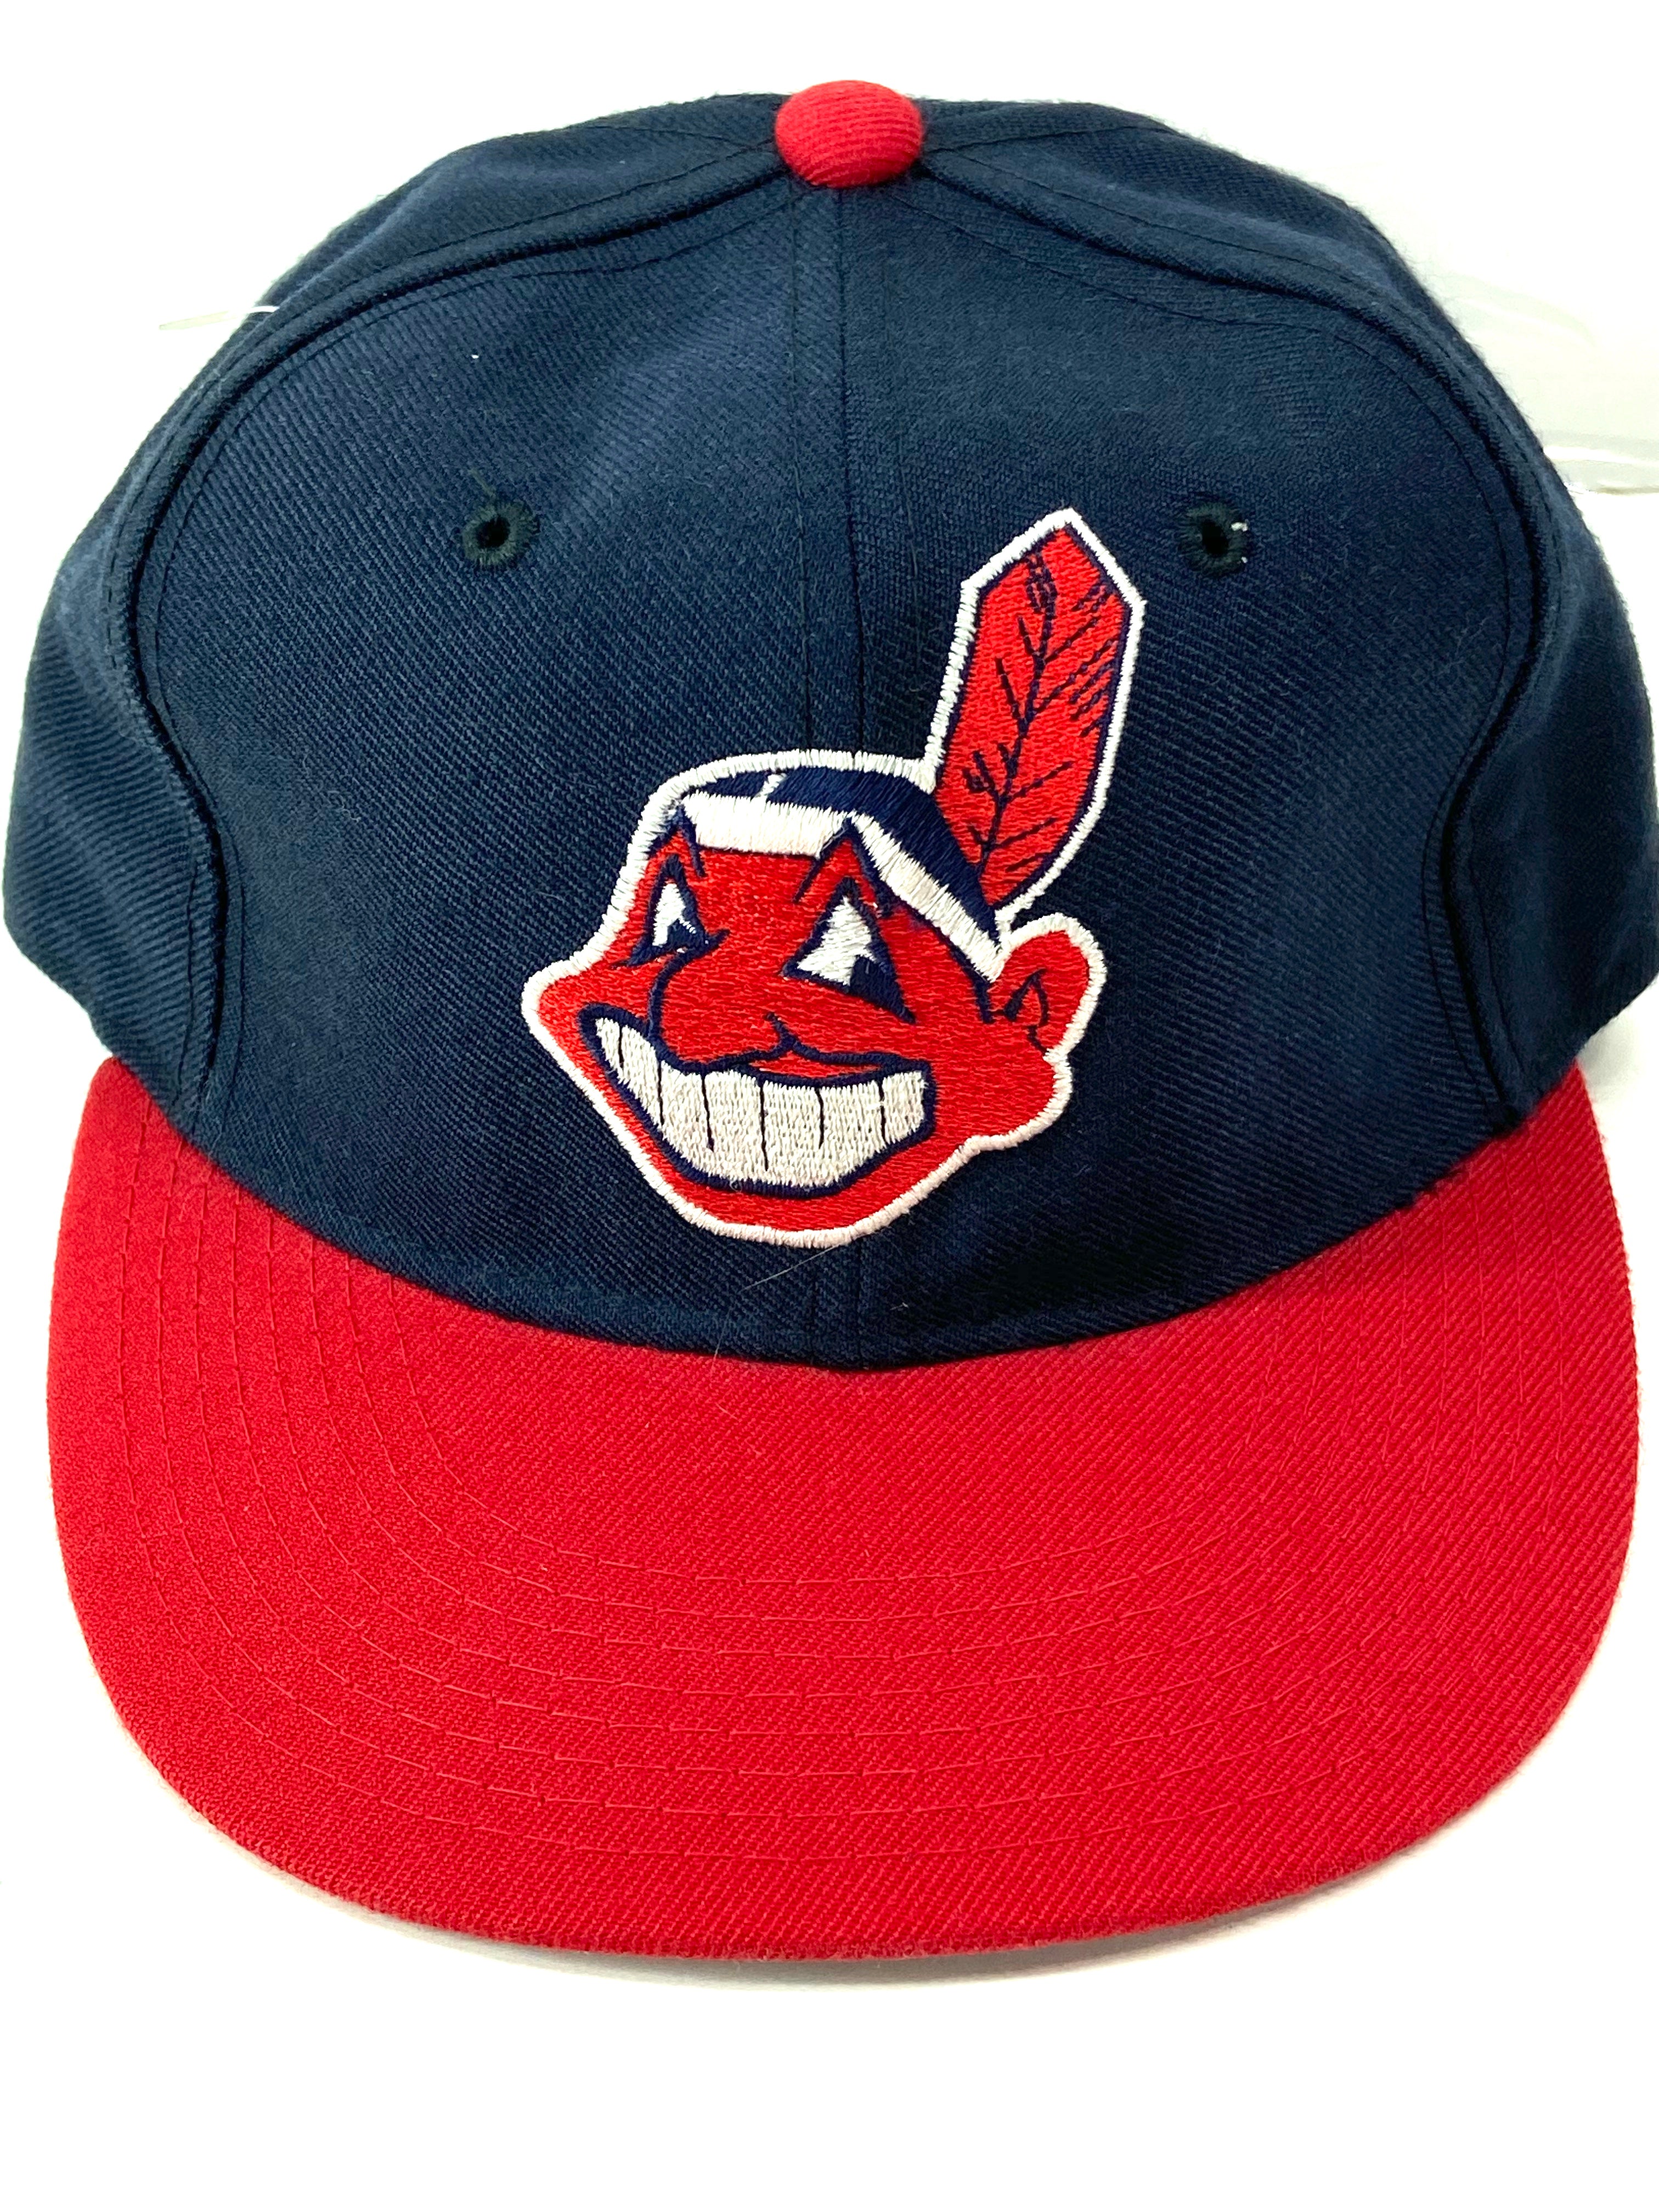 Cleveland Indians Vintage MLB Fitted 100% Wool Cap By New Era